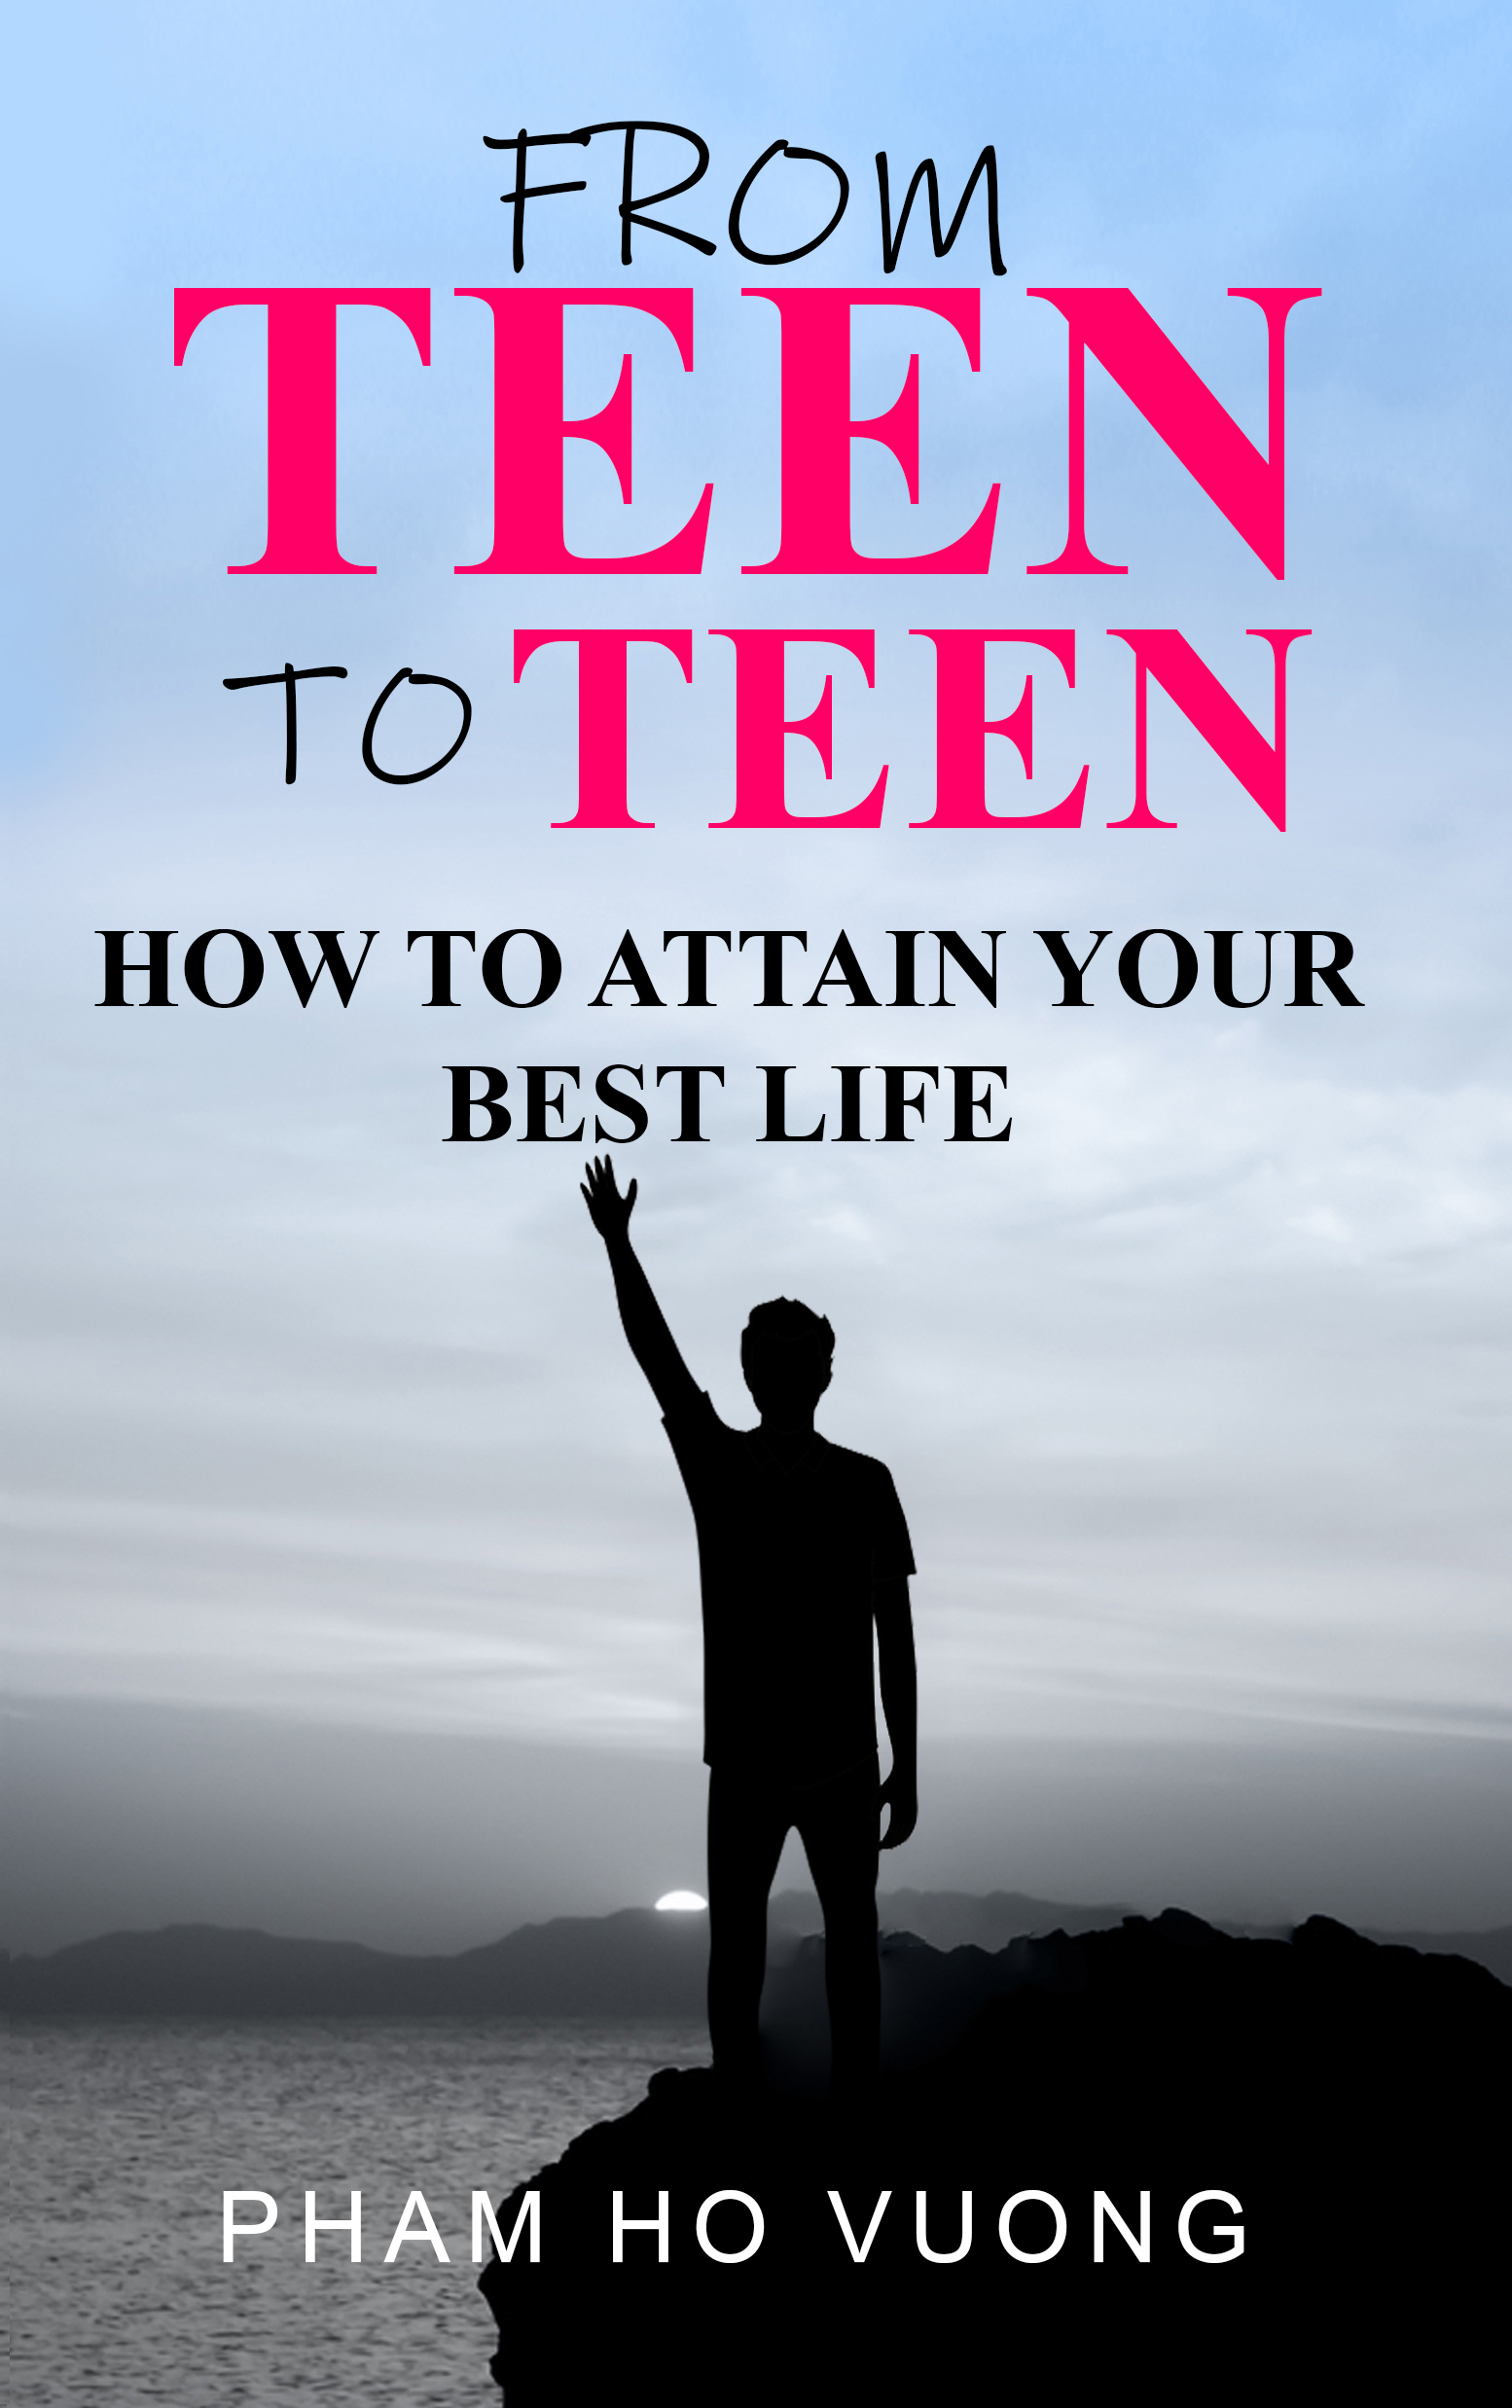 FREE: From teen to teen: How to attain your best life by Pham Ho Vuong